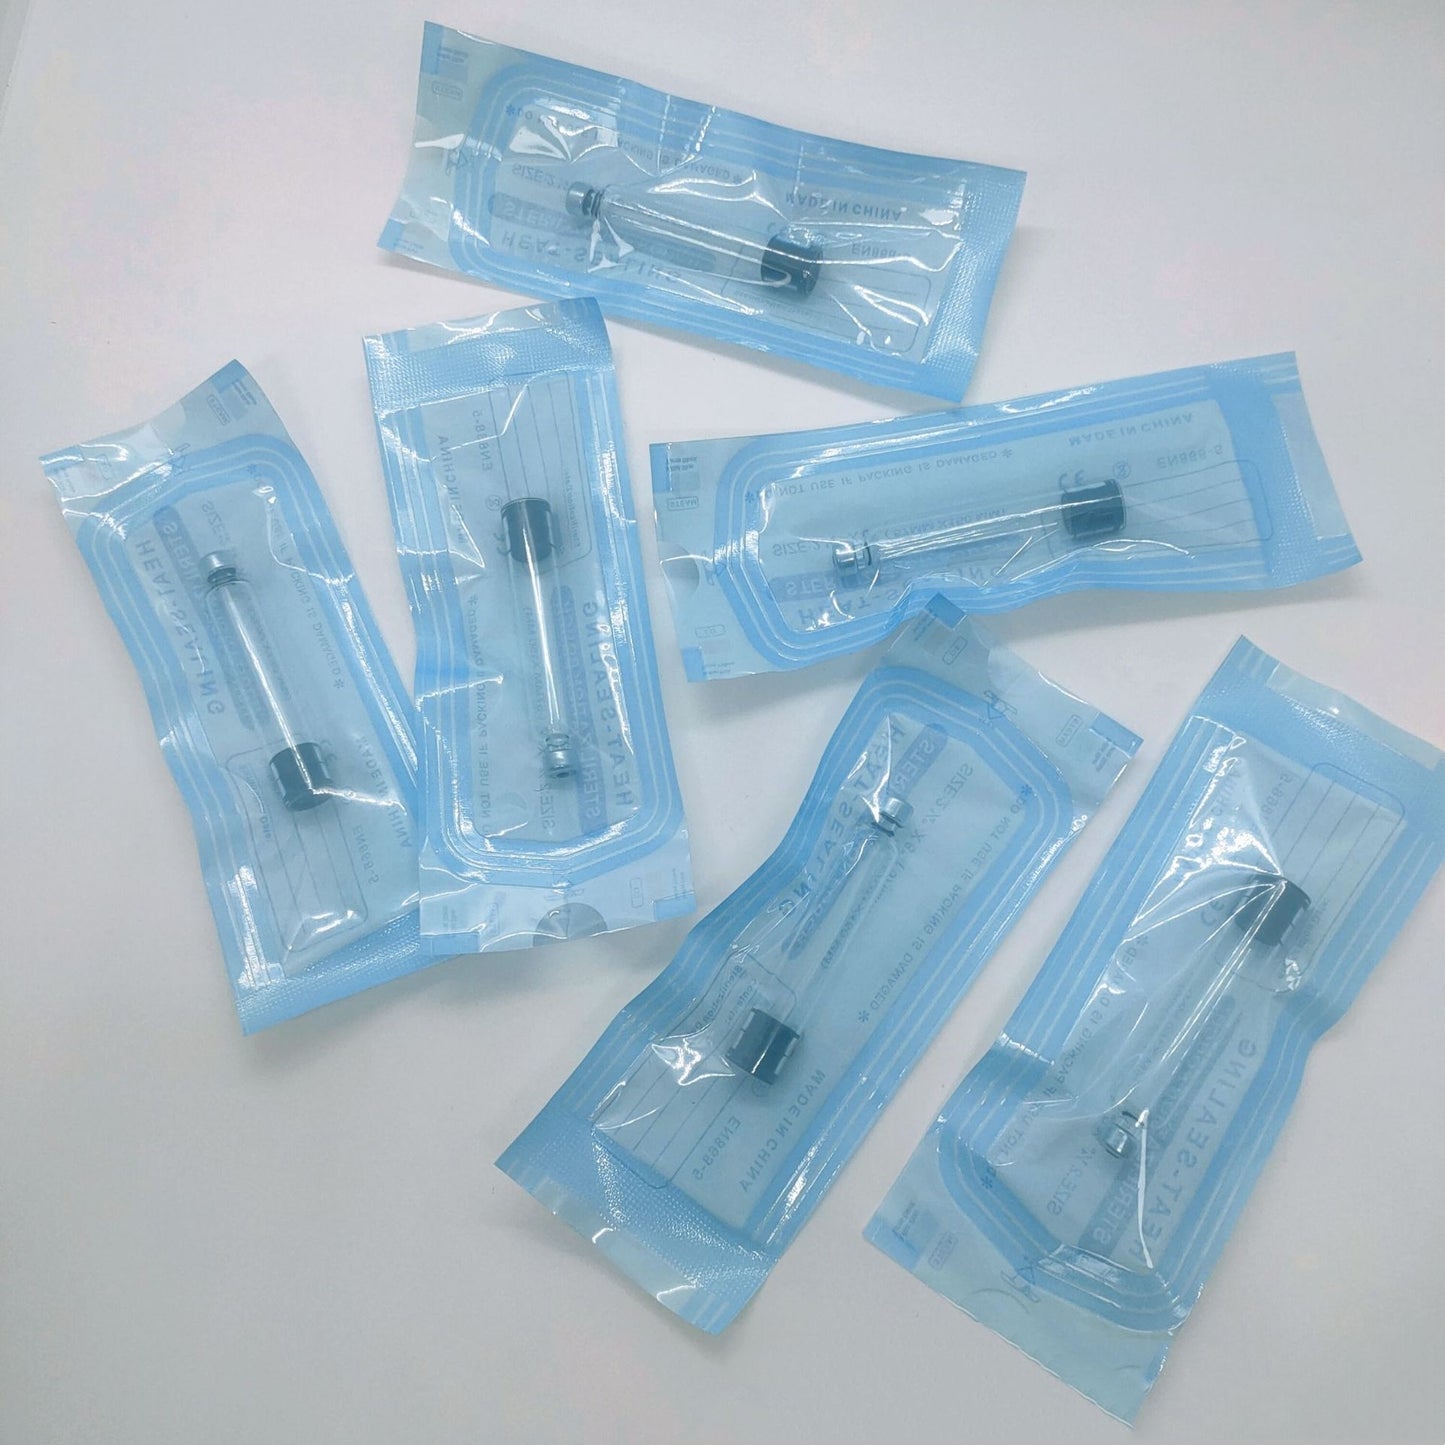 3ml Glass Cartridge For Injection Pen